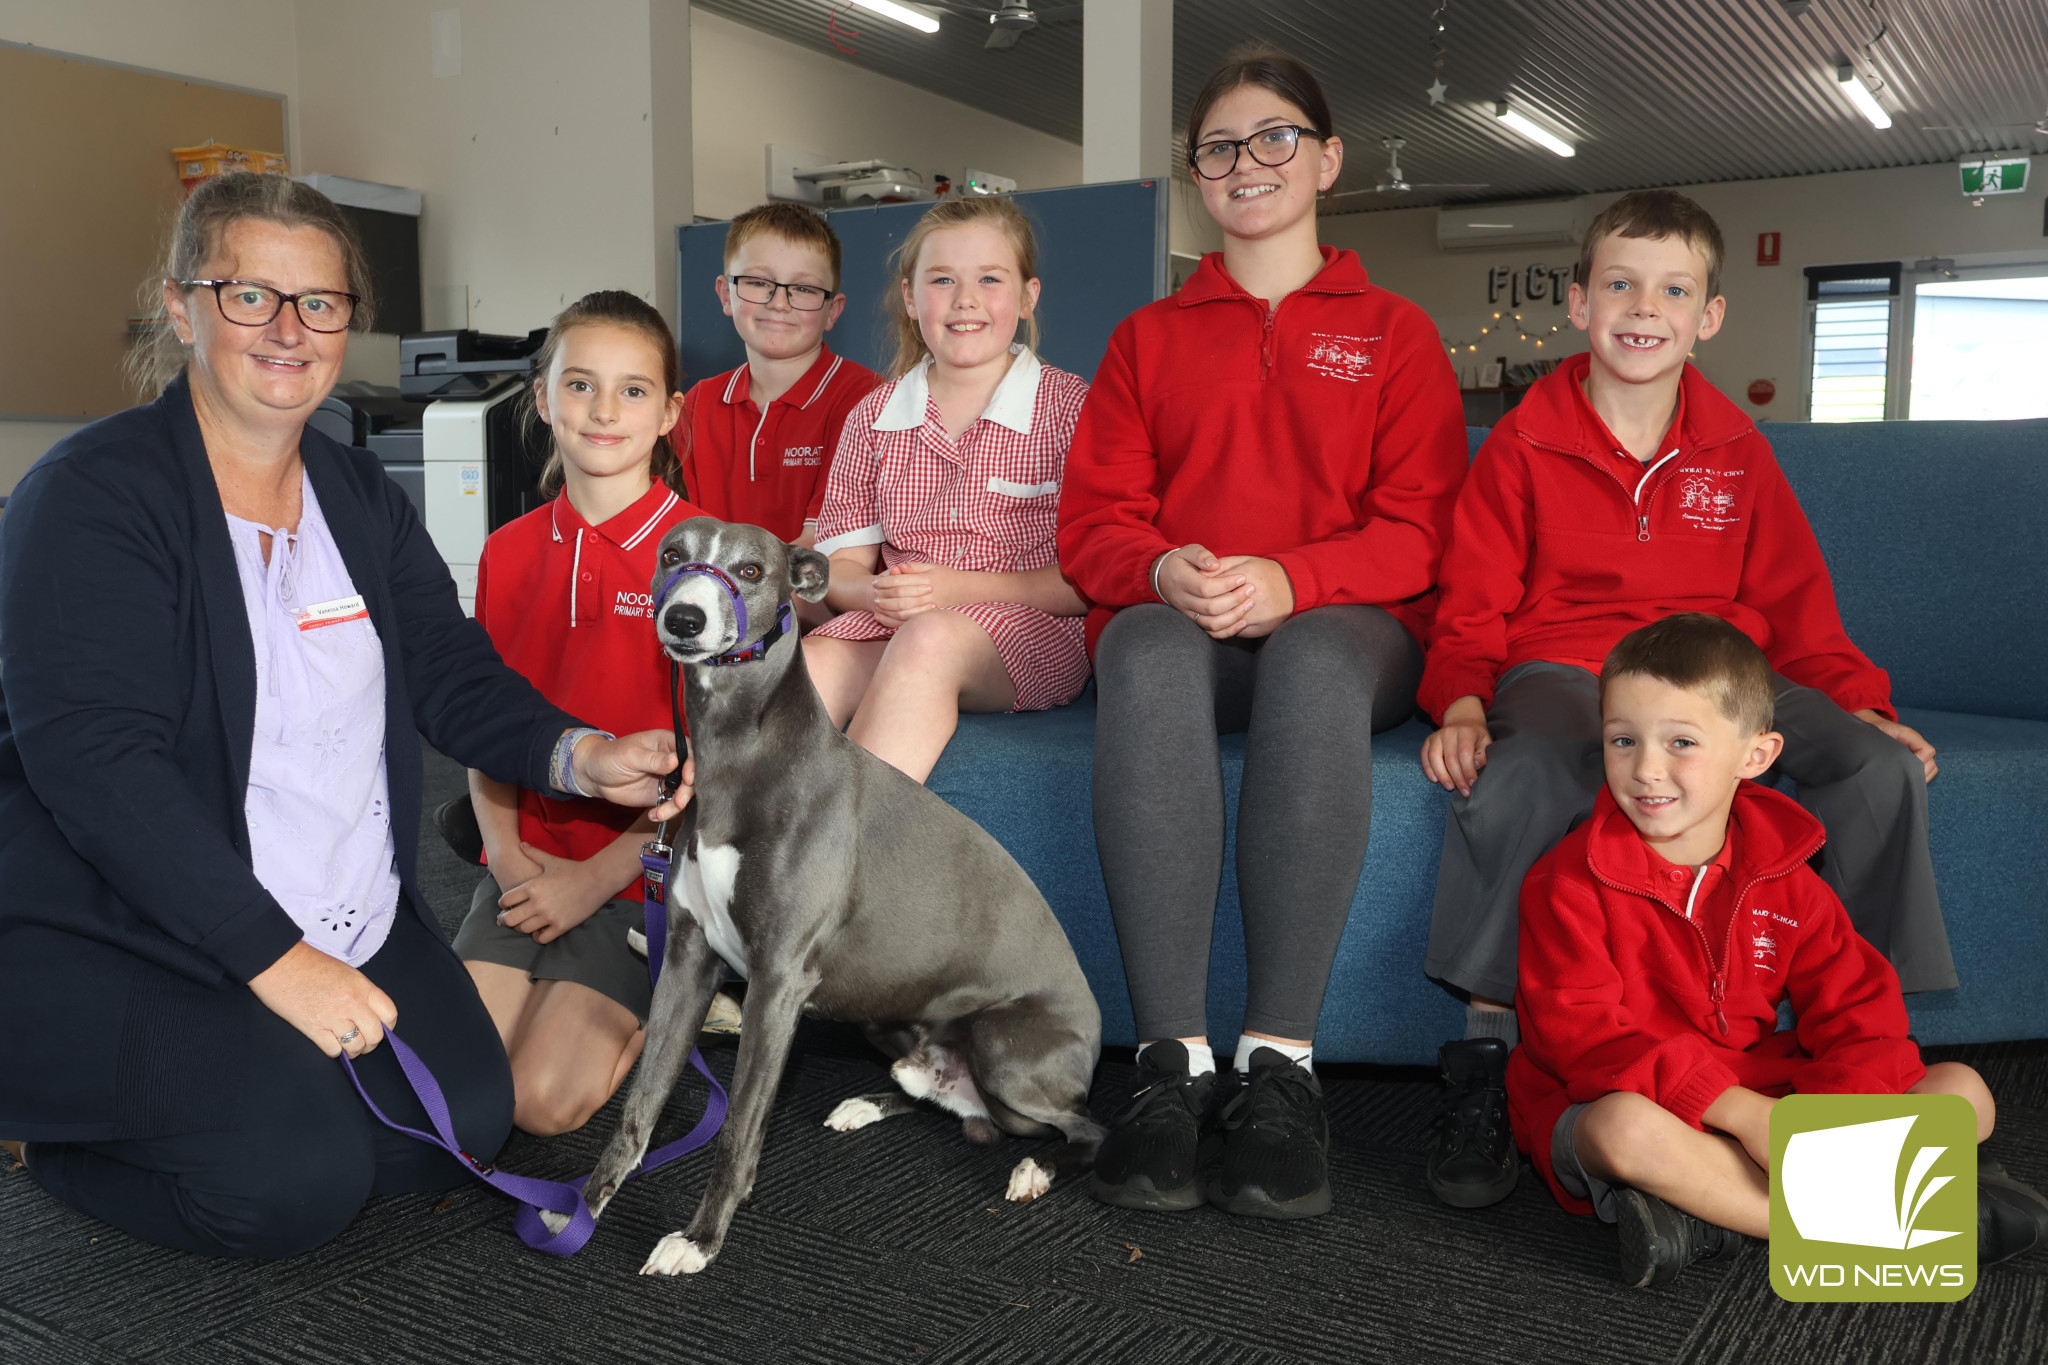 New addition: Noorat Primary School students welcomed animal-assisted therapy dog Spud in to the classroom this week, who will, with the support of education support staff member Vanessa Howard, help to make the learning environment at school as positive as it can be.